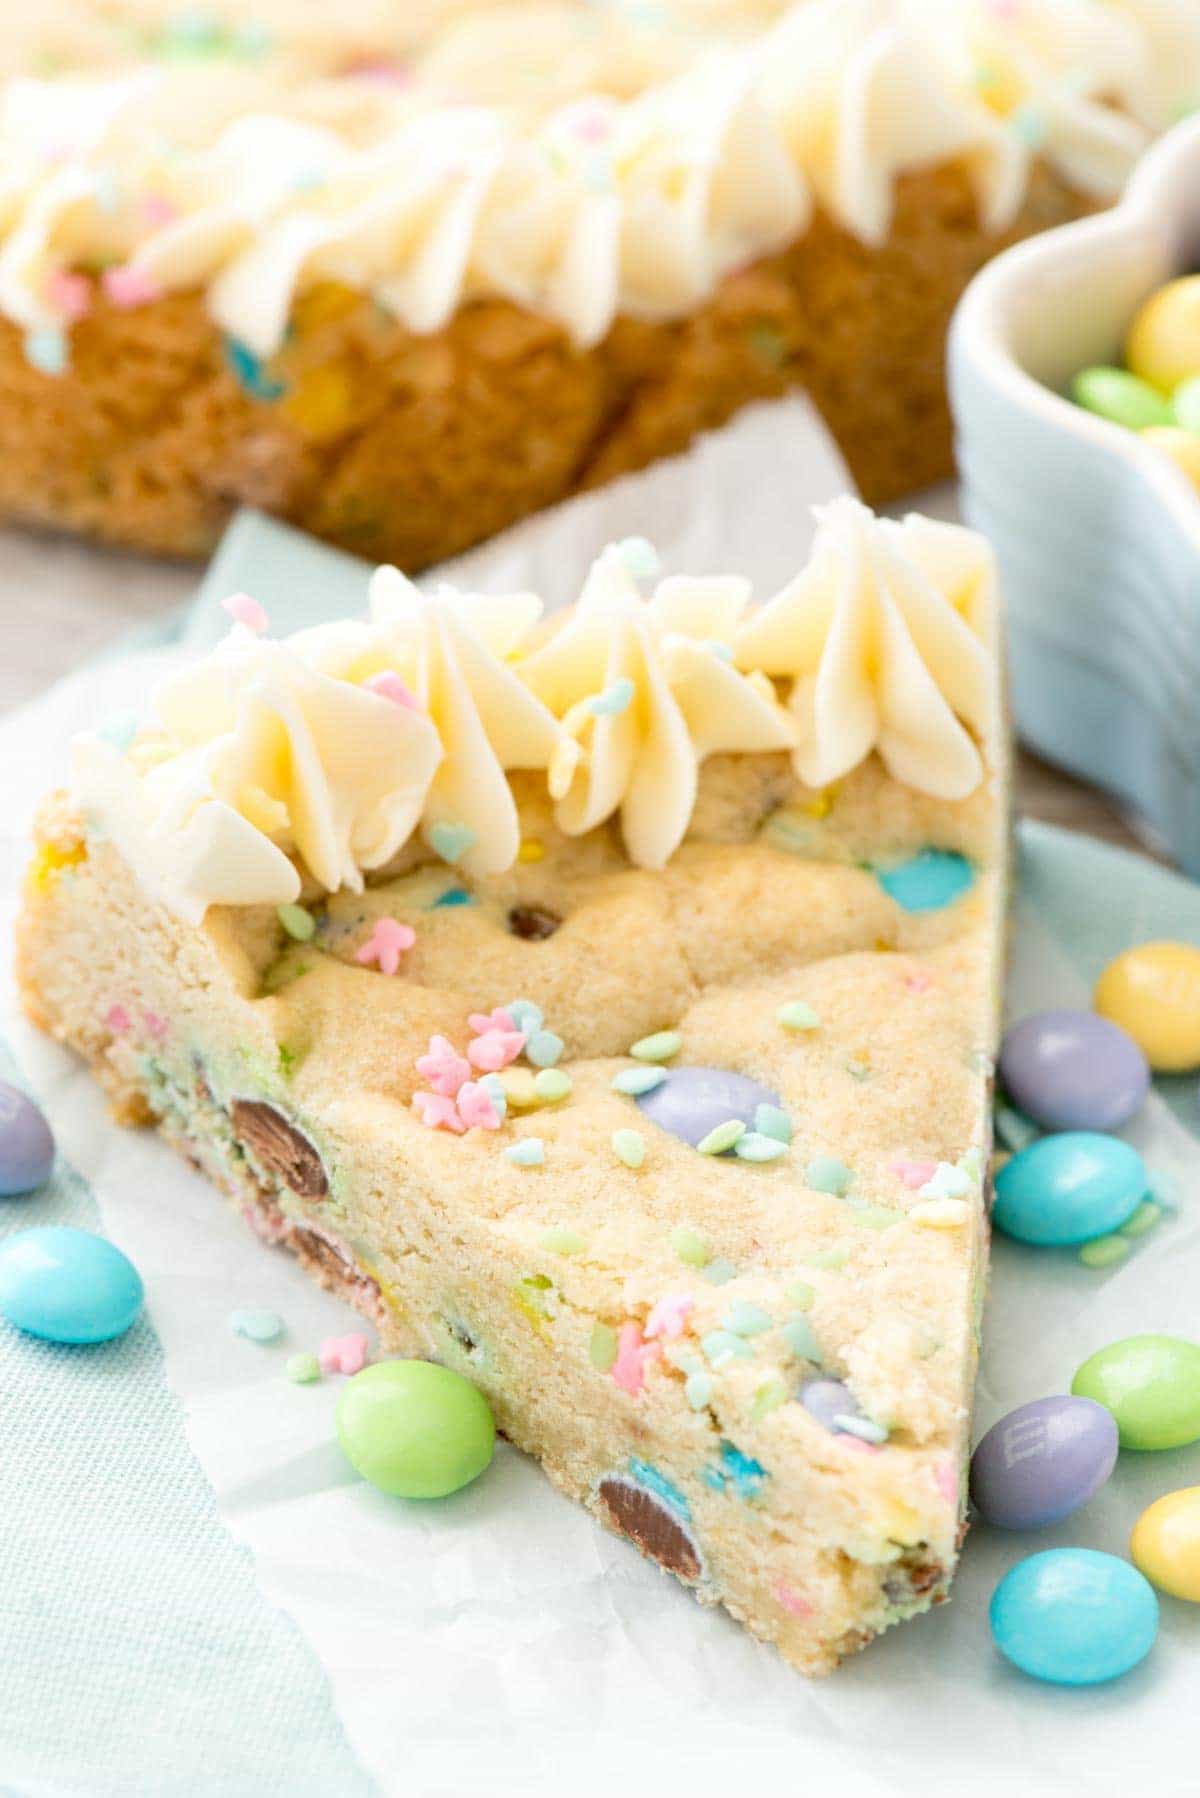 Easter Sugar Cookie Cake - this easy sugar cookie recipe is filled with spring M&Ms and sprinkles and baked in a cake pan. Make an easy frosting and you have the perfect spring cookie cake!